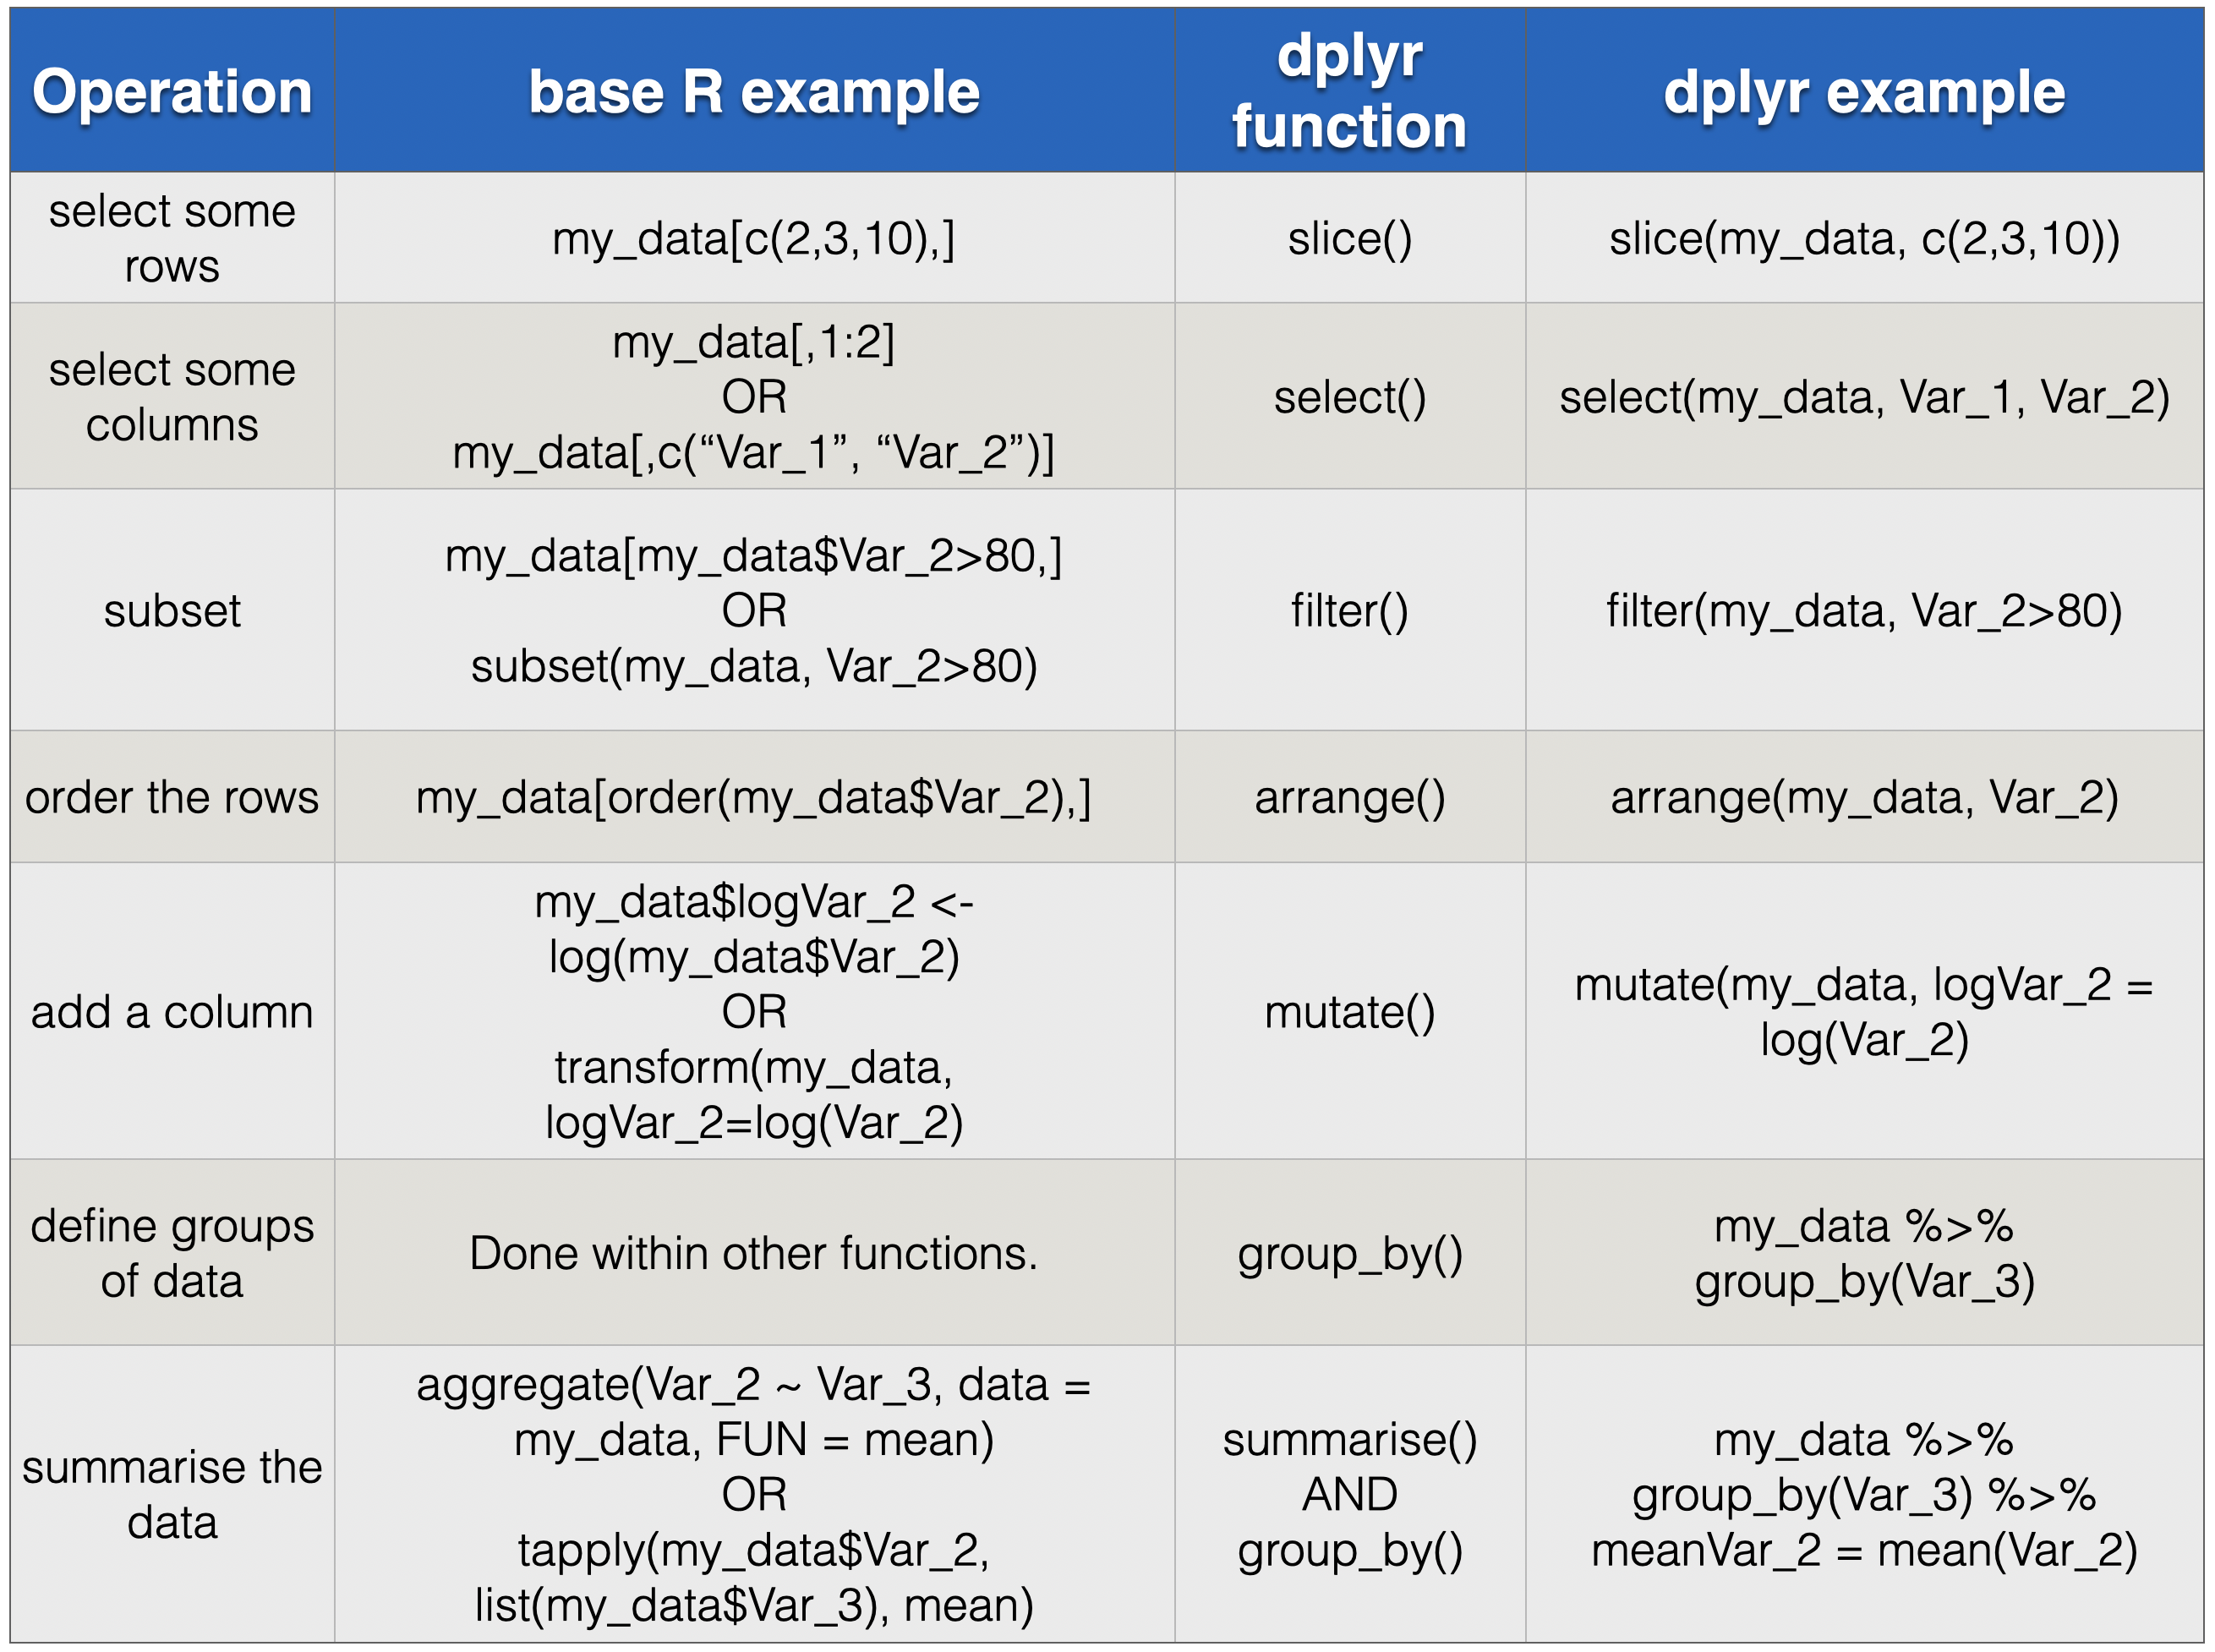 Comparison of classic/base R methods and dplyr methods for common operations.